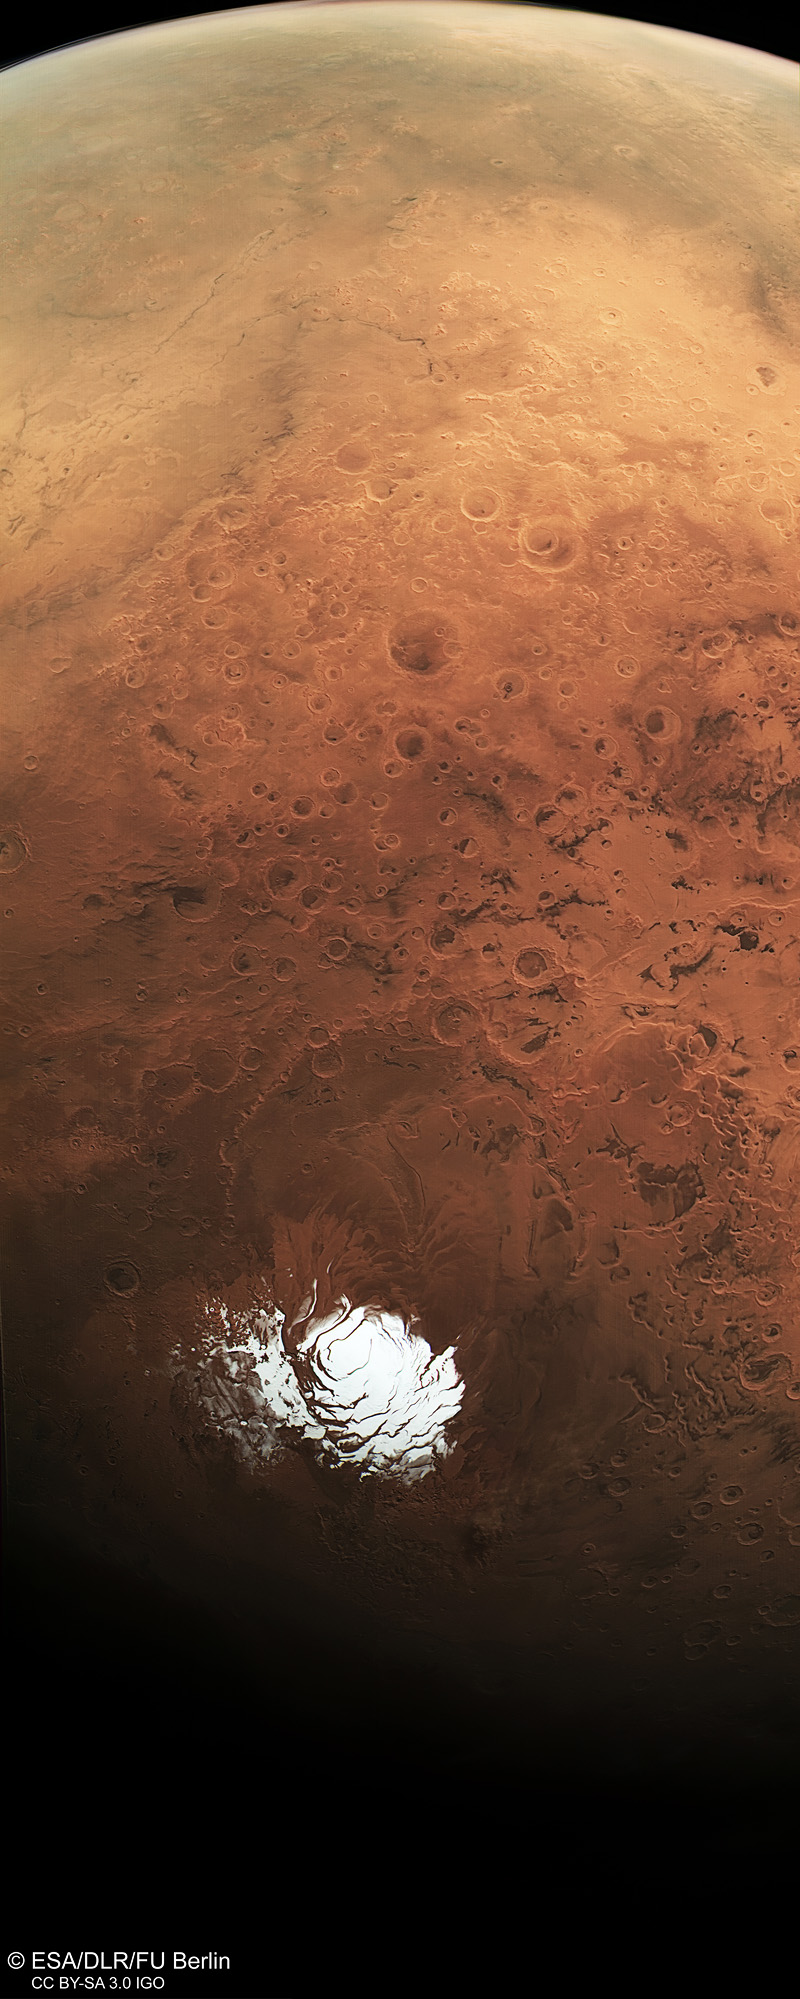 Here Is A Rare View Of Mars’ Icy Backside